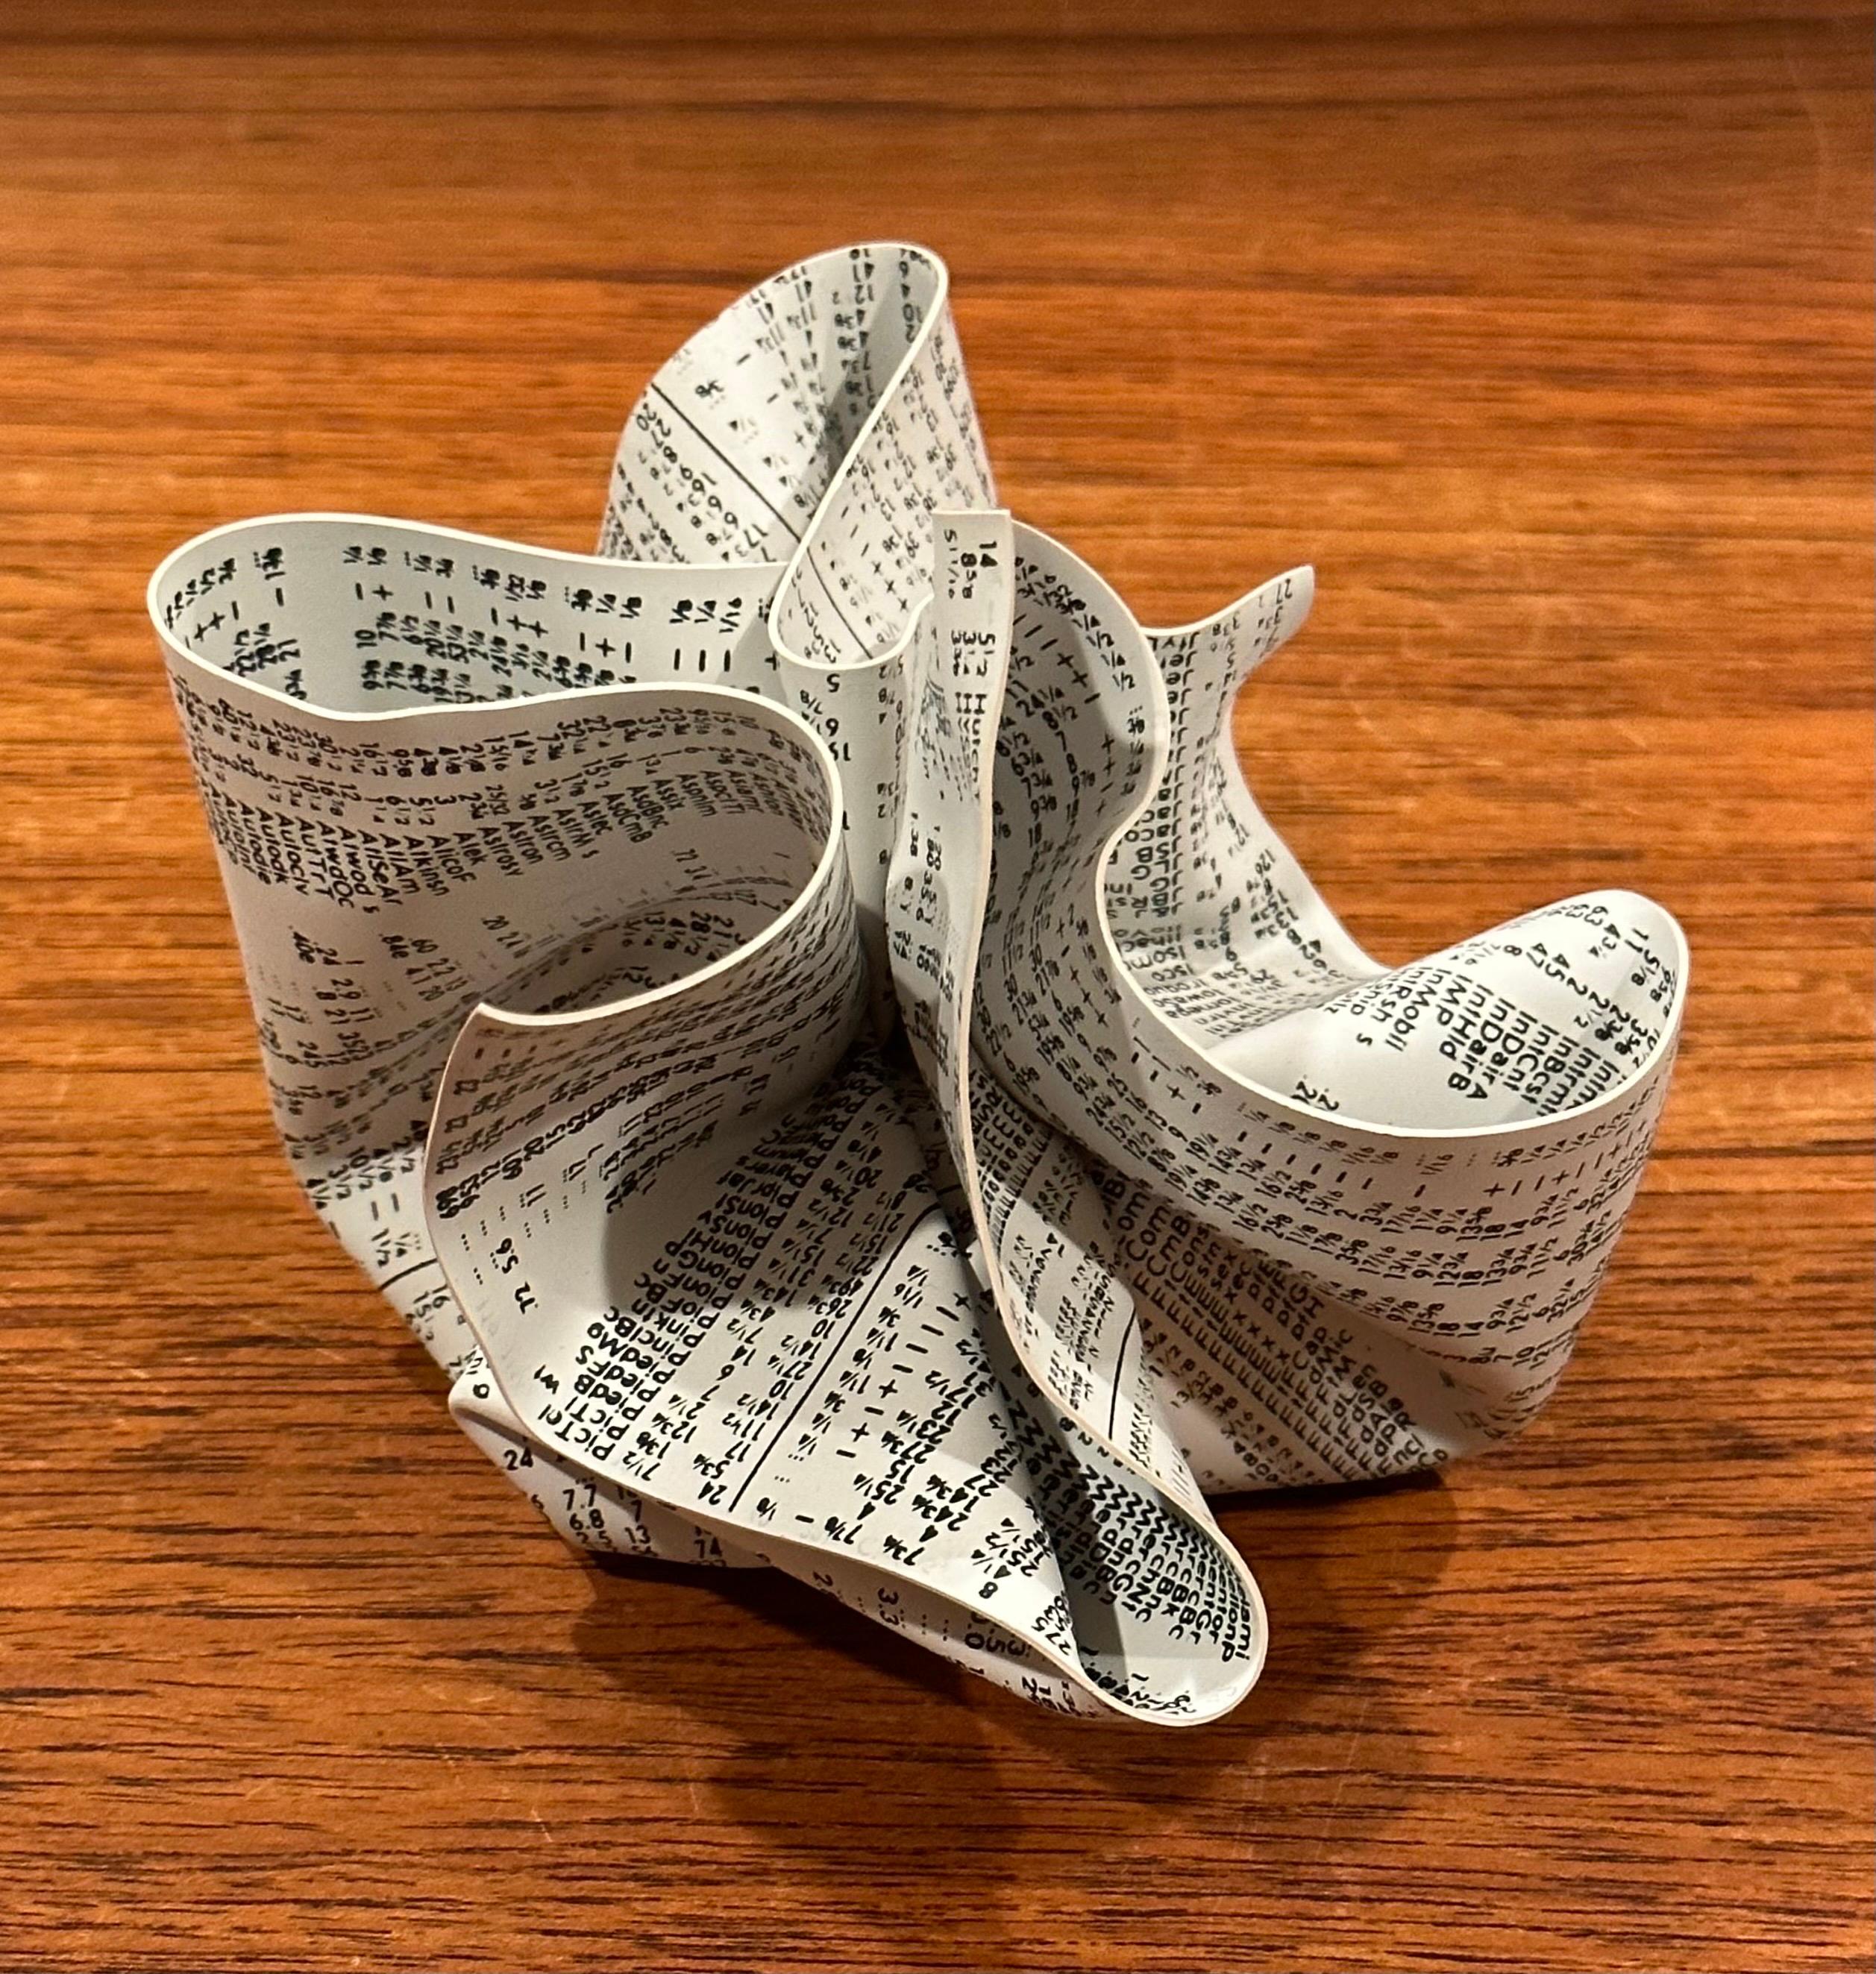 A very cool crumpled WSJ / newspaper paperweight by designer Tibor Kalman for M & Co. and MOMA, circa 1980s.  This three-dimensional art object is made of rigid silk-screened vinyl featuring a stock exchange newsprint, hand-crumpled, and wrapped